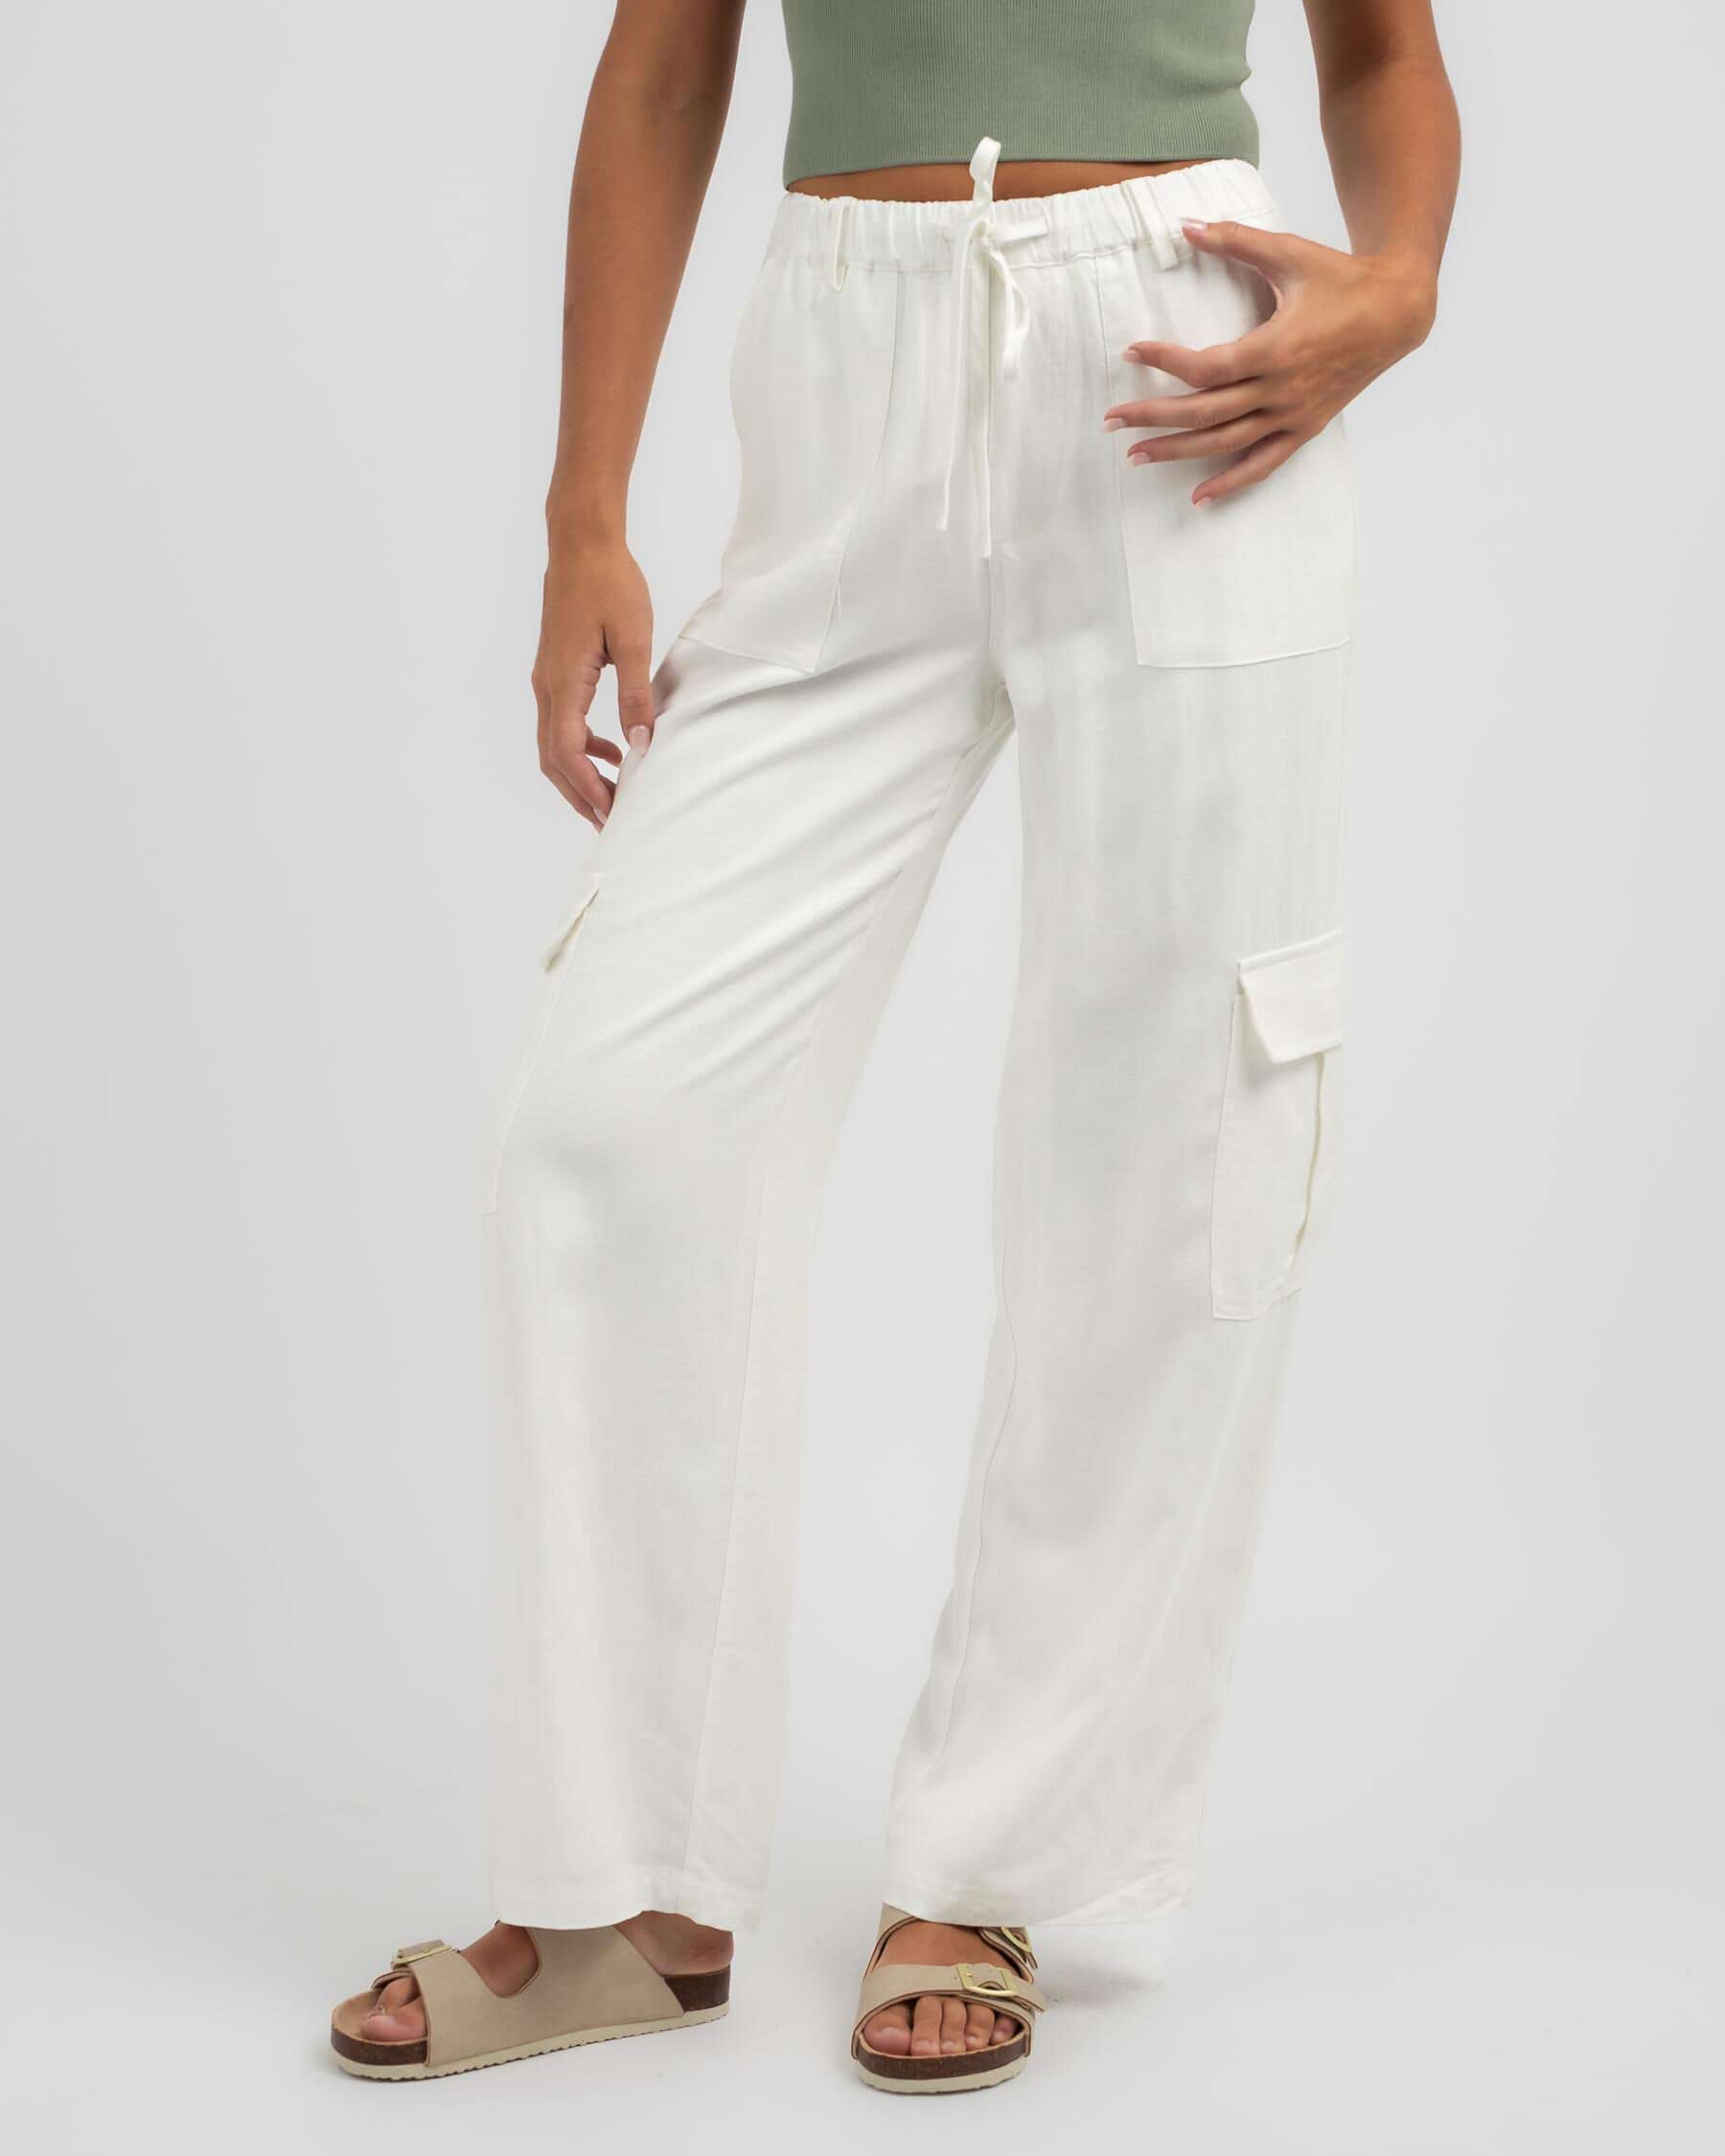 Shop Womens Pants Online - FREE* Shipping & Easy Returns - City